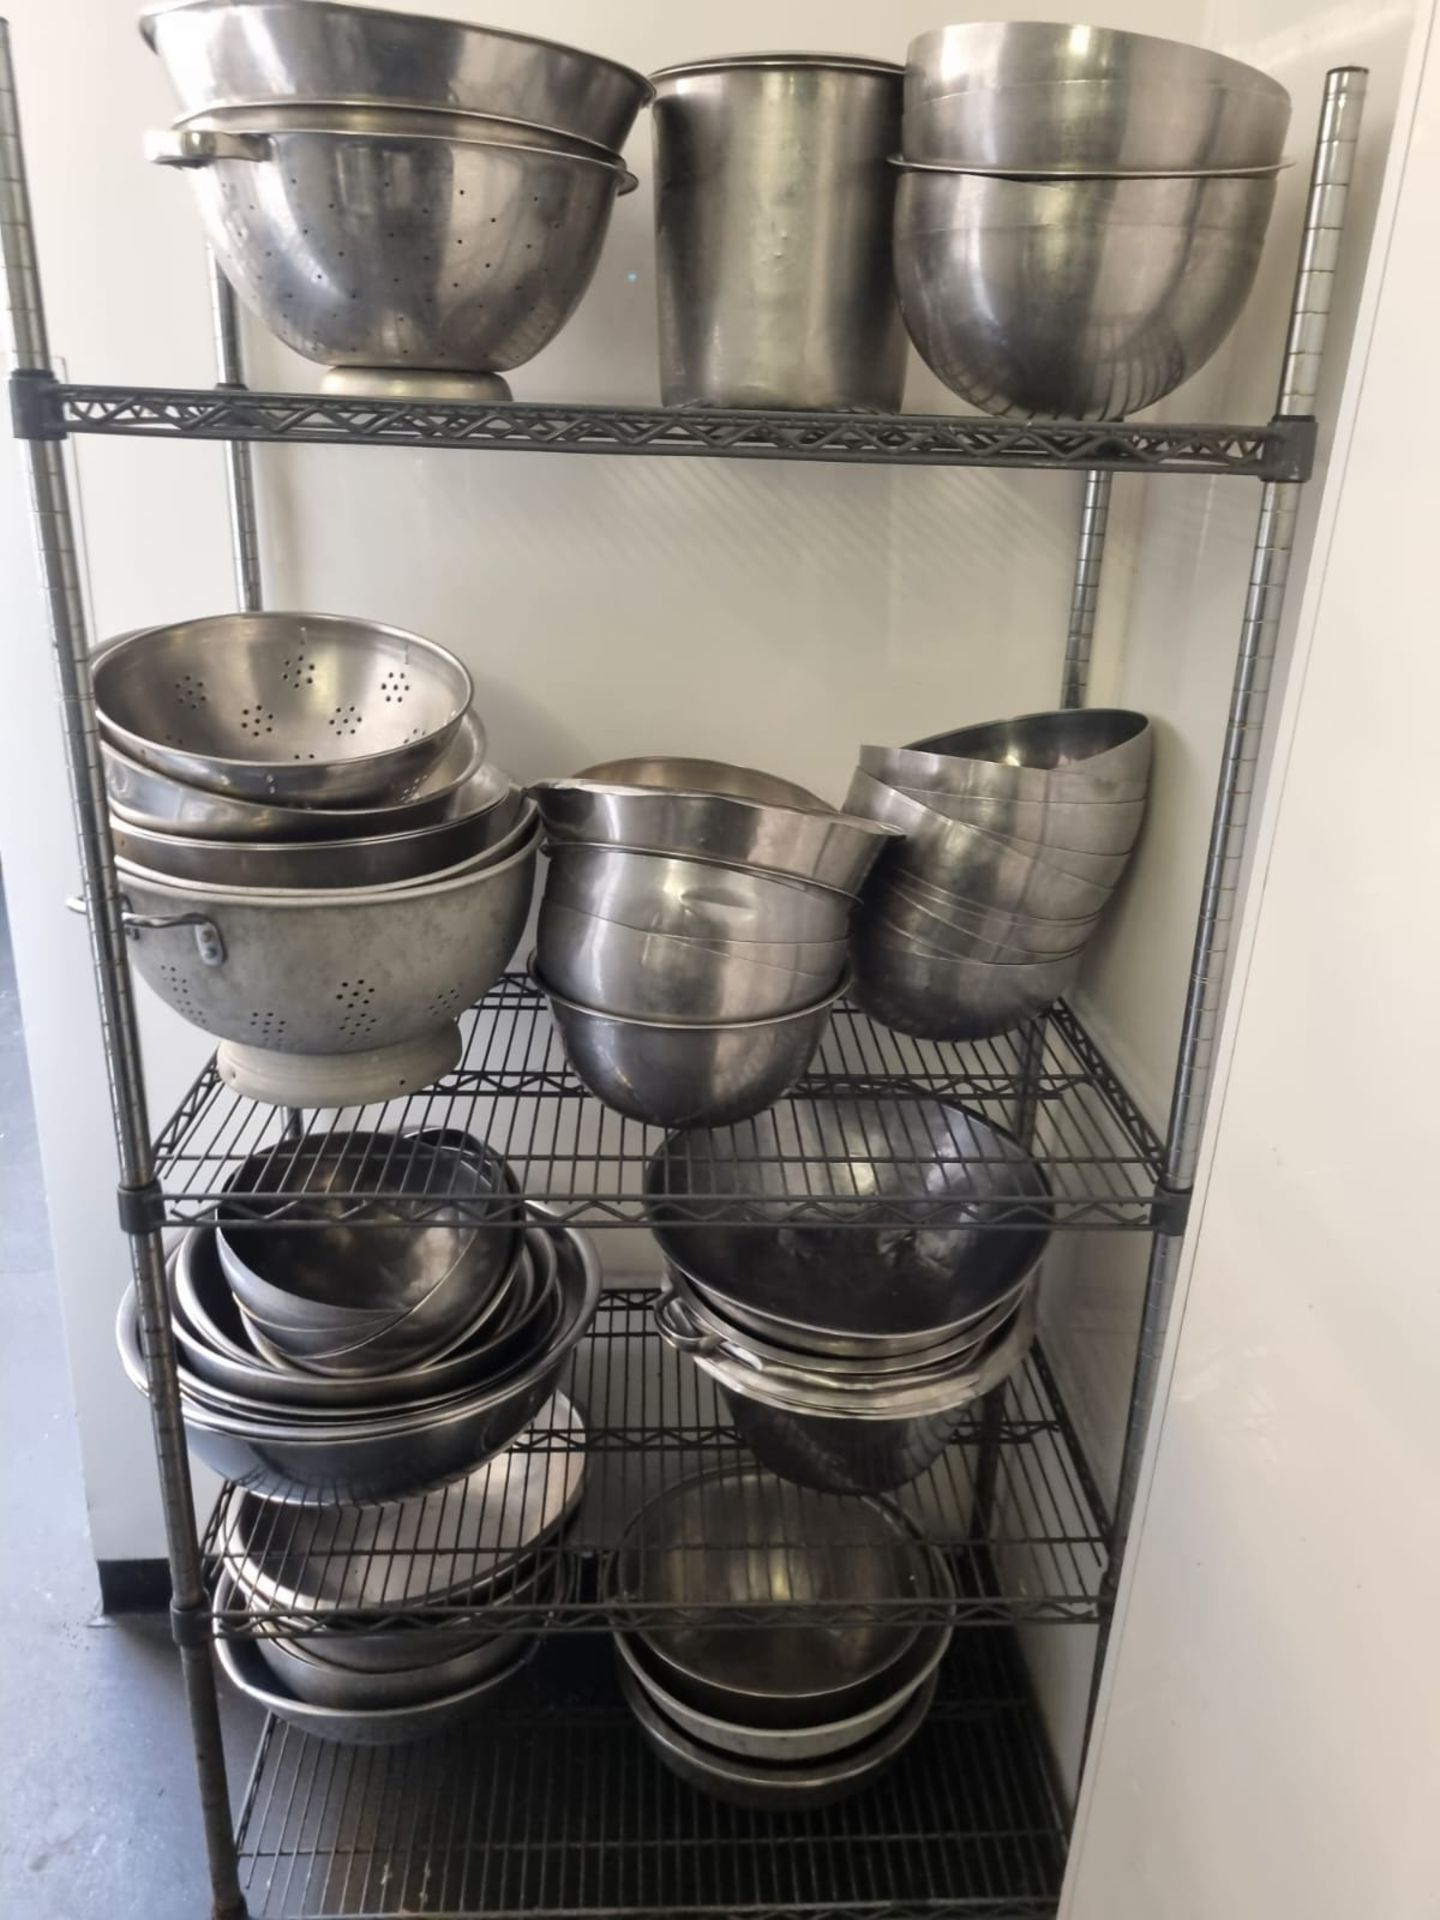 OEM- Various collanders sieves and bowls as phtotraphed ( Main Kitchen )